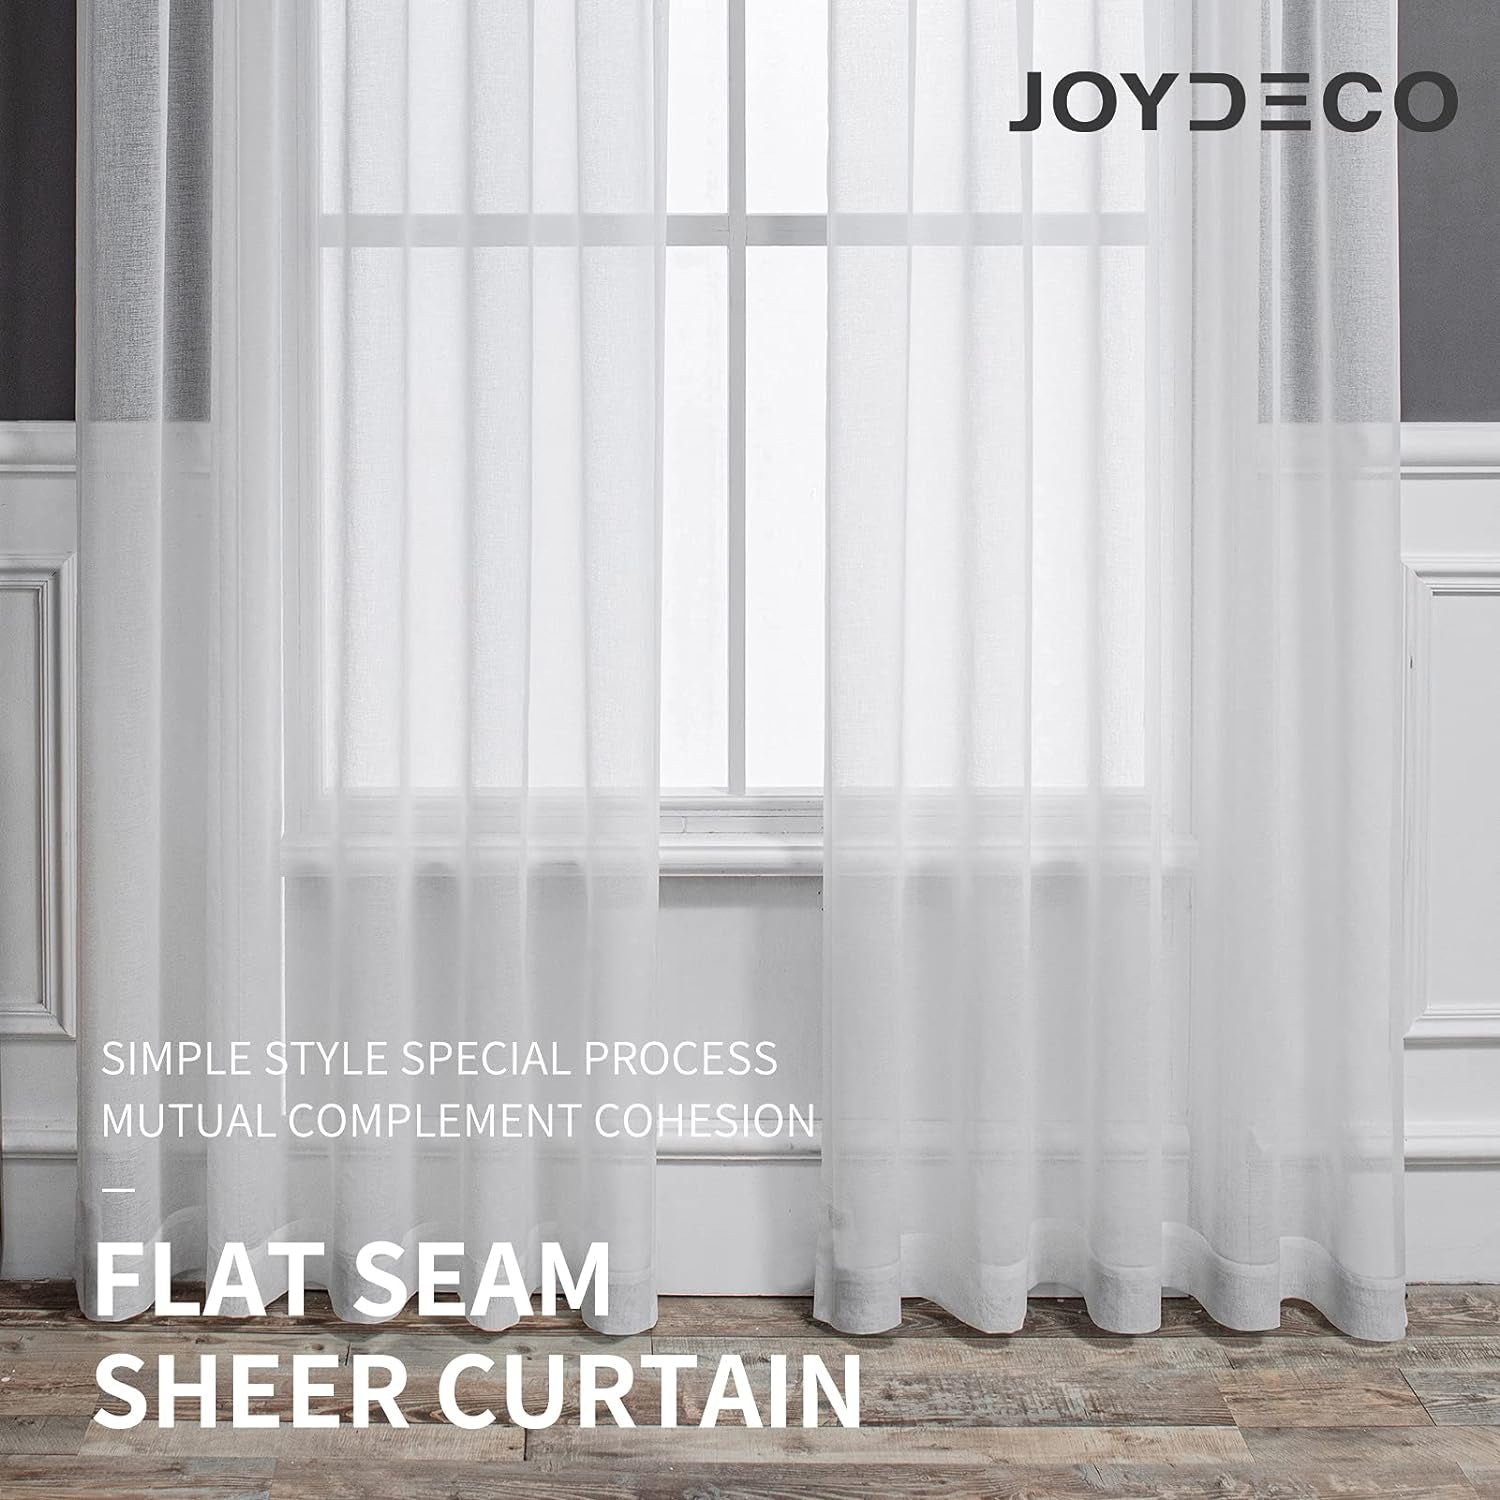 Joydeco White Sheer Curtains 63 Inch Length 2 Panels Set, Rod Pocket Long Sheer Curtains for Window Bedroom Living Room, Lightweight Semi Drape Panels for Yard Patio (54X63 Inch, off White)  Joydeco   